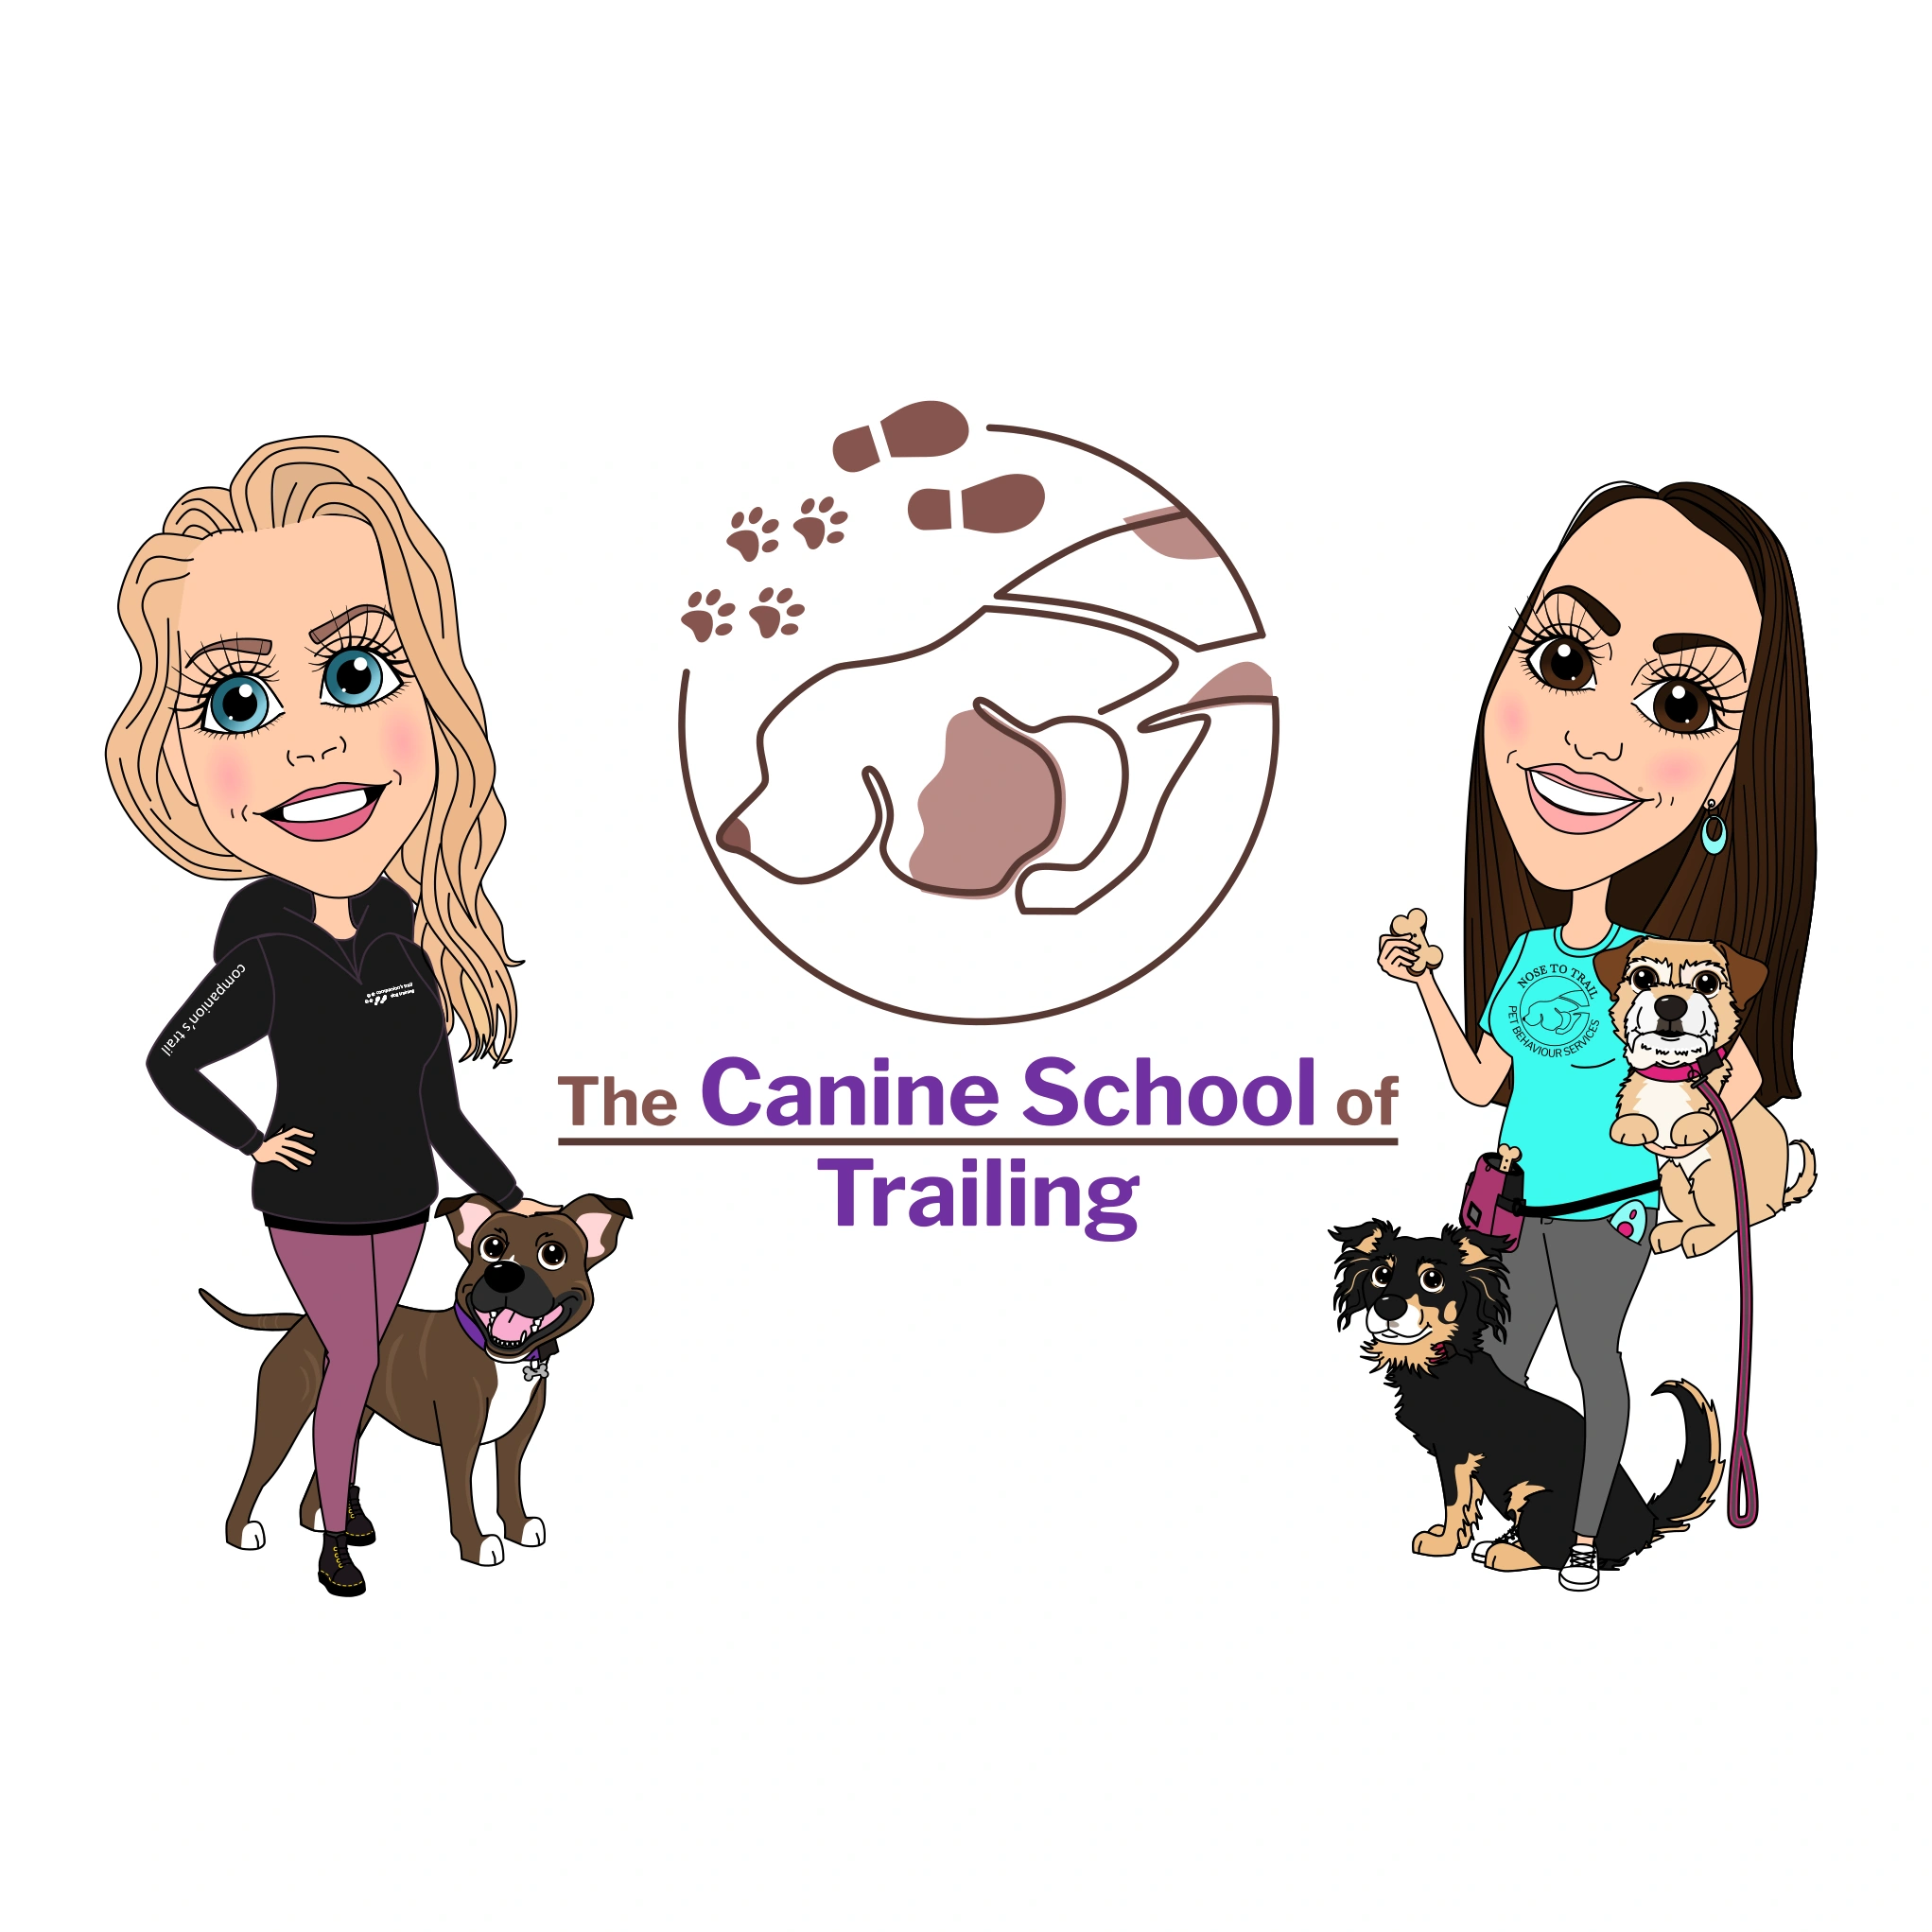 Cartoon showing Marilyn and Rachel the owners of The Canine School of Trailing